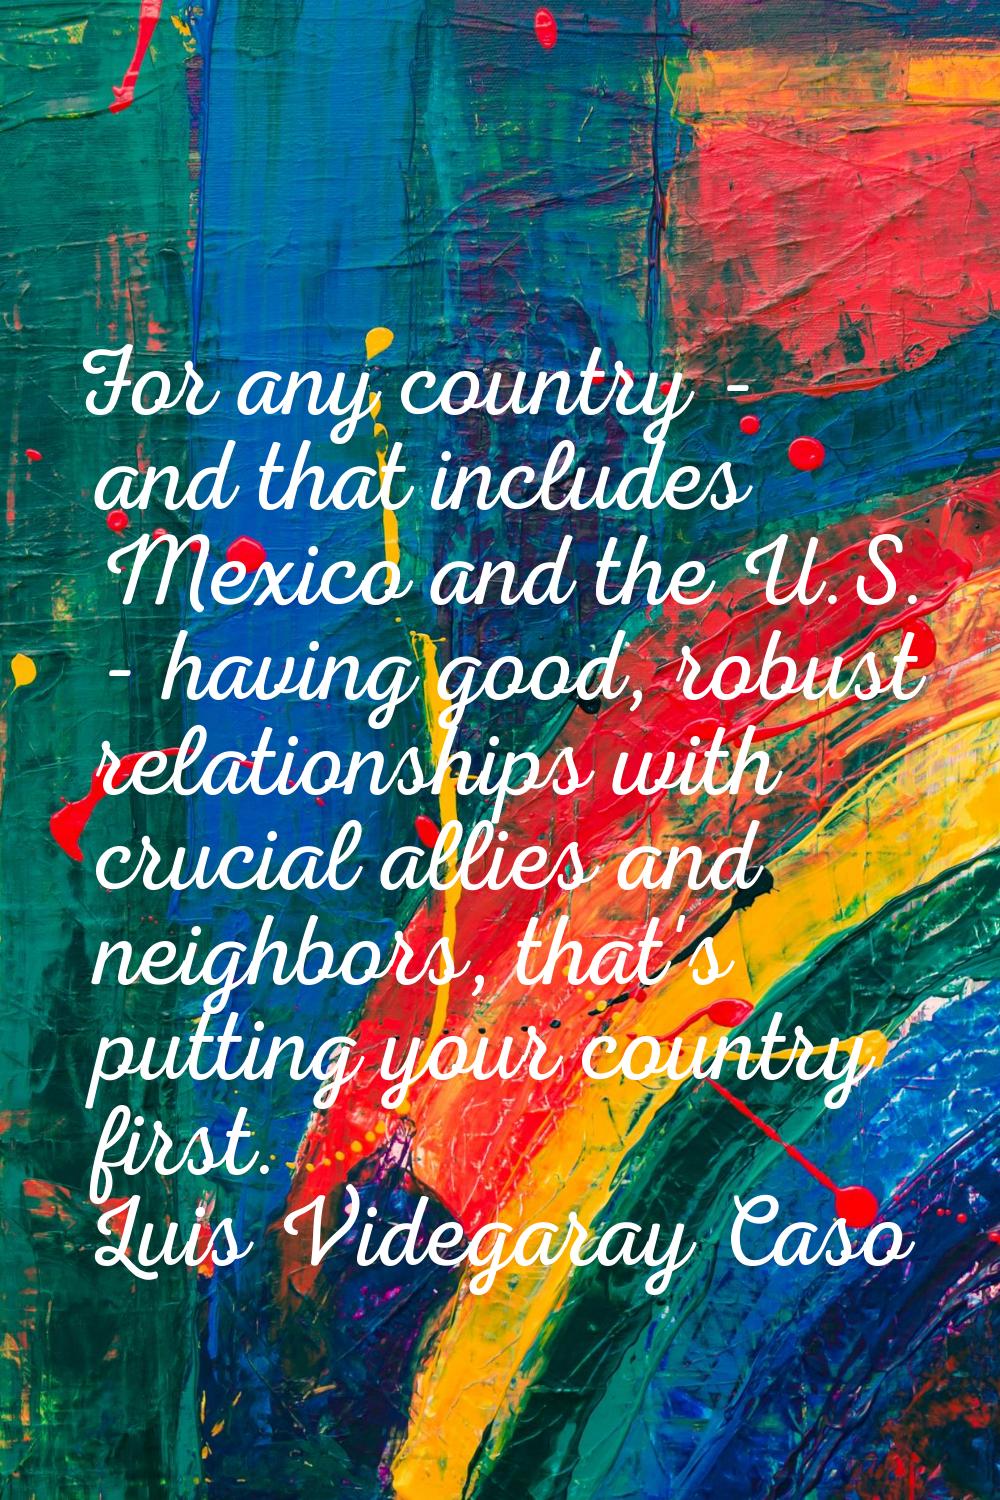 For any country - and that includes Mexico and the U.S. - having good, robust relationships with cr